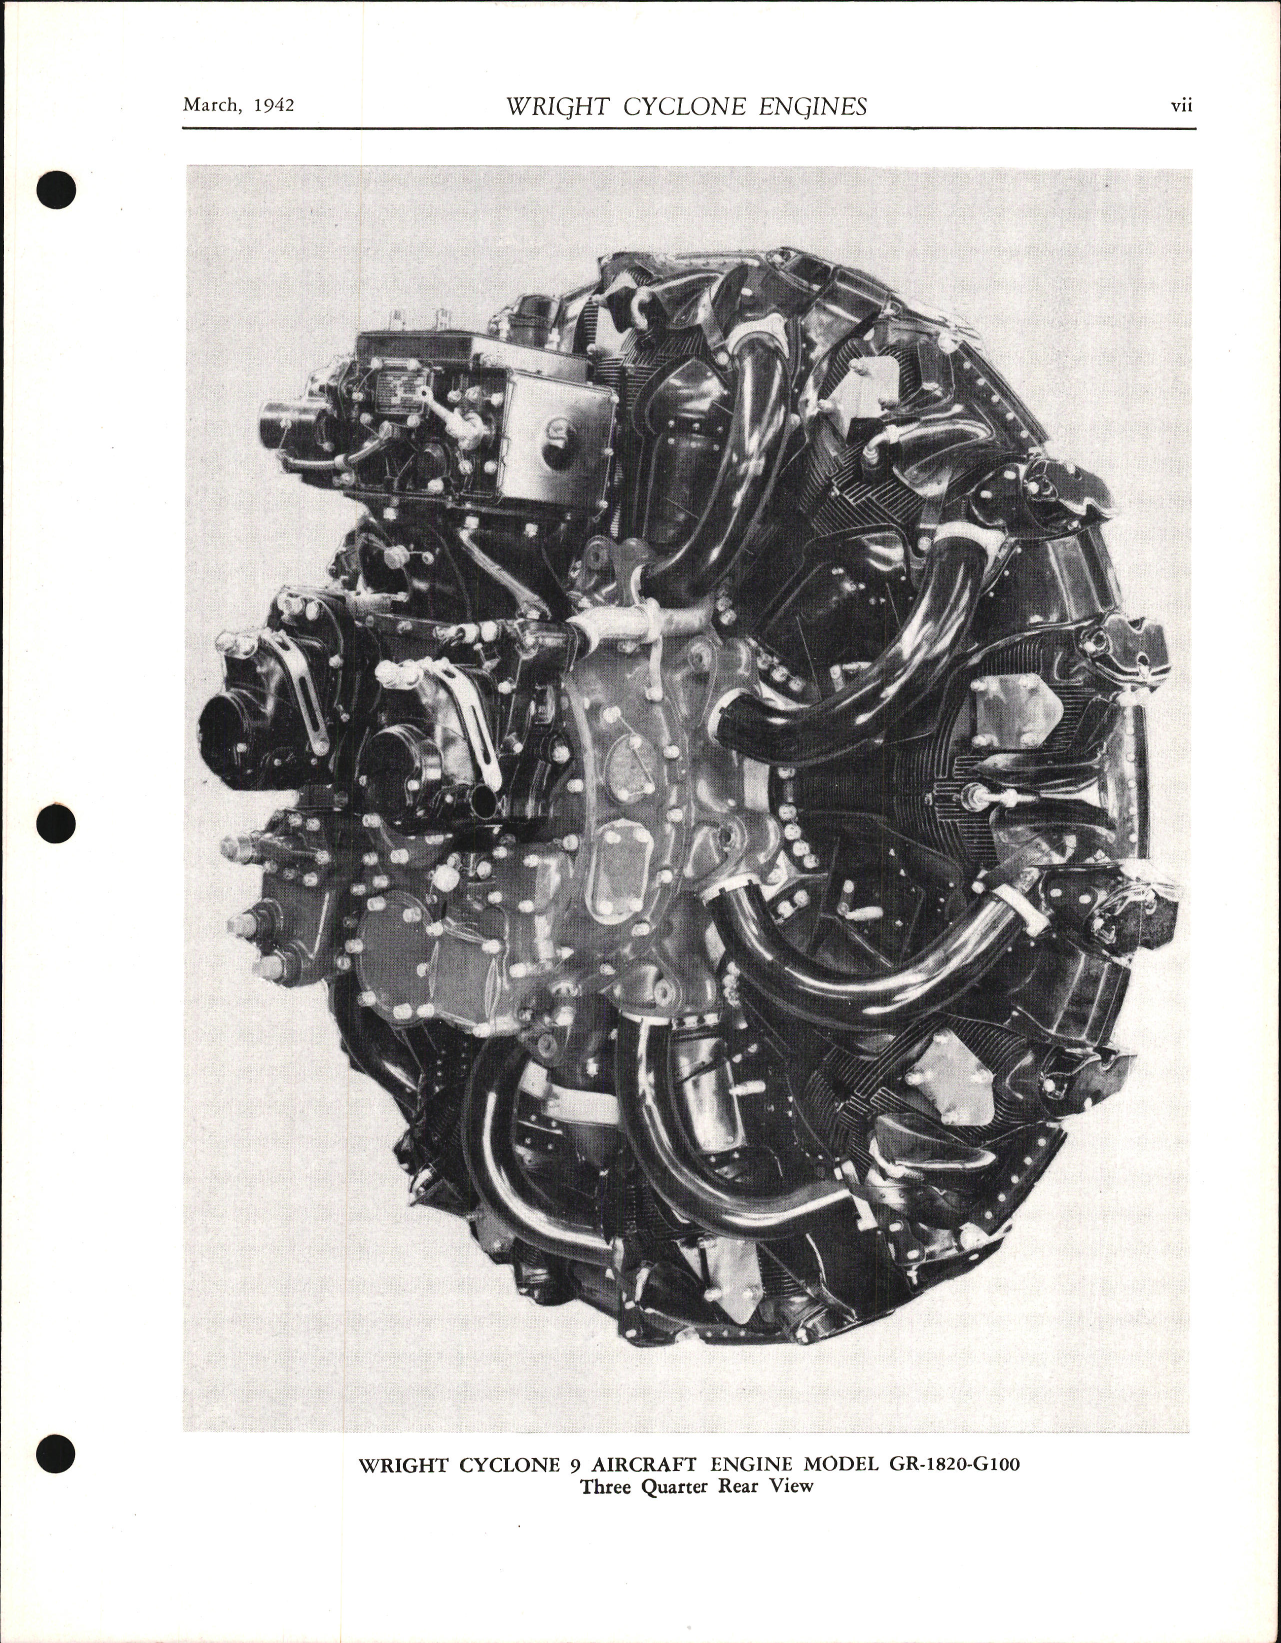 Sample page 7 from AirCorps Library document: Install, Operation, and Maintenance for Cyclone 9 Models C9GA and C9GB